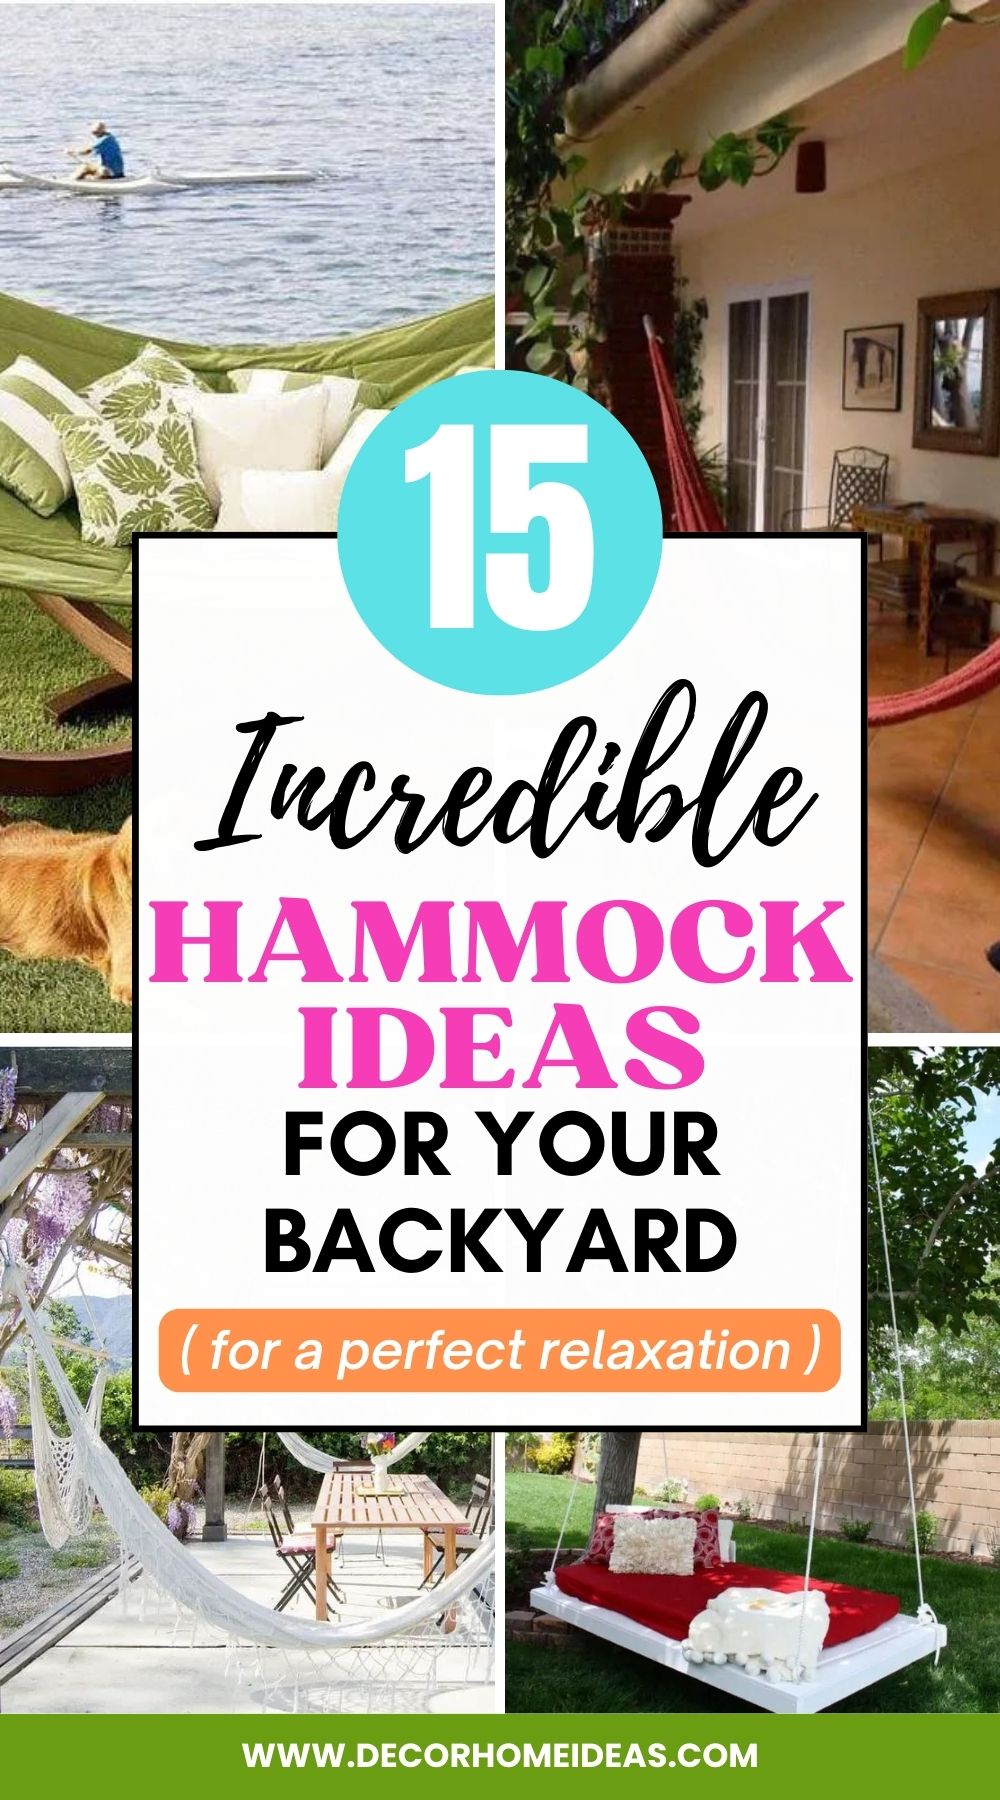 Create a relaxing outdoor space with these 15 hammock ideas for your backyard. From DIY projects to store-bought options, find the perfect hammock for your outdoor oasis.